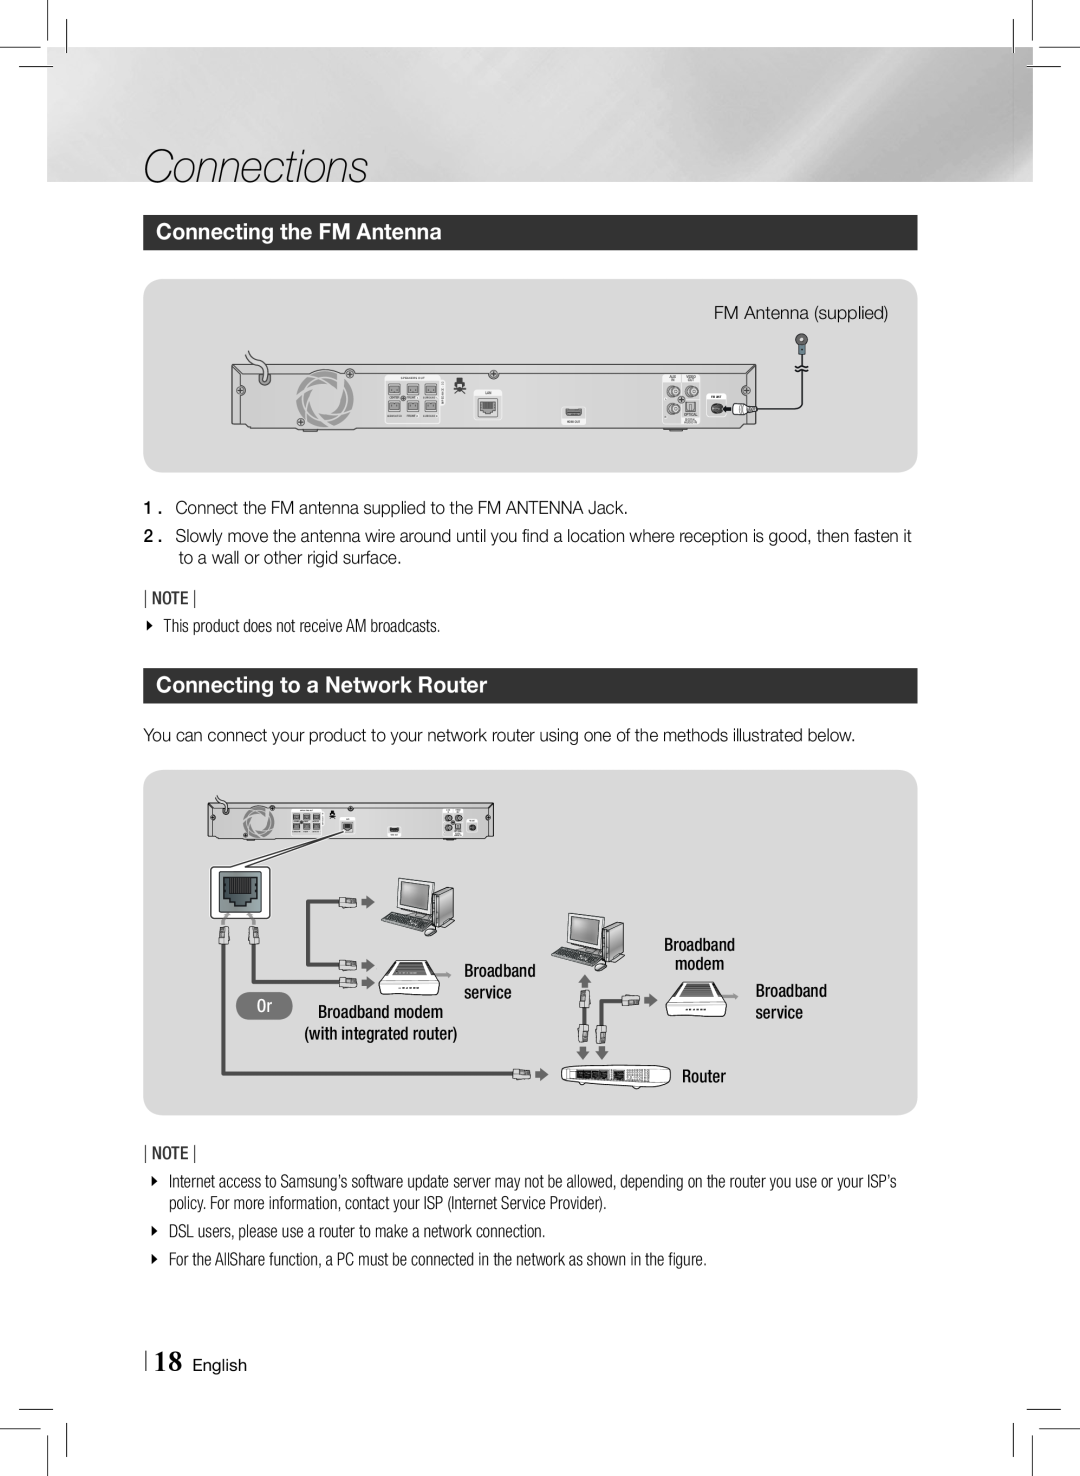 Samsung HTE3500ZA user manual Connecting the FM Antenna, Connecting to a Network Router, Connections 